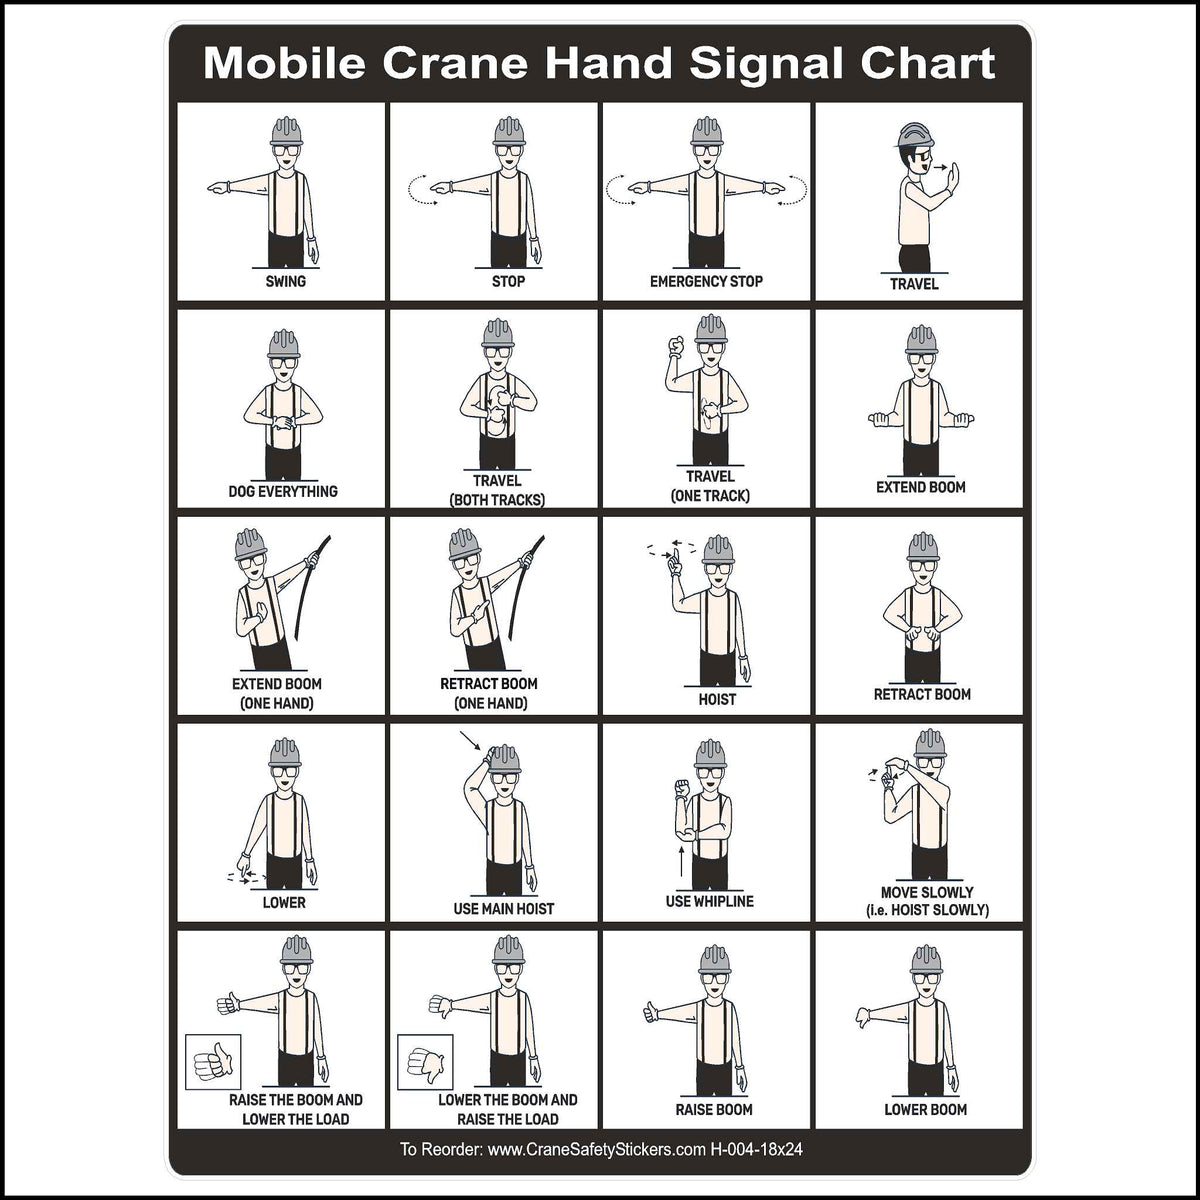 18 Inches Wide by 24 inches Tall Mobile Hand Signal Chart Printed with all 20 Hand Signals.